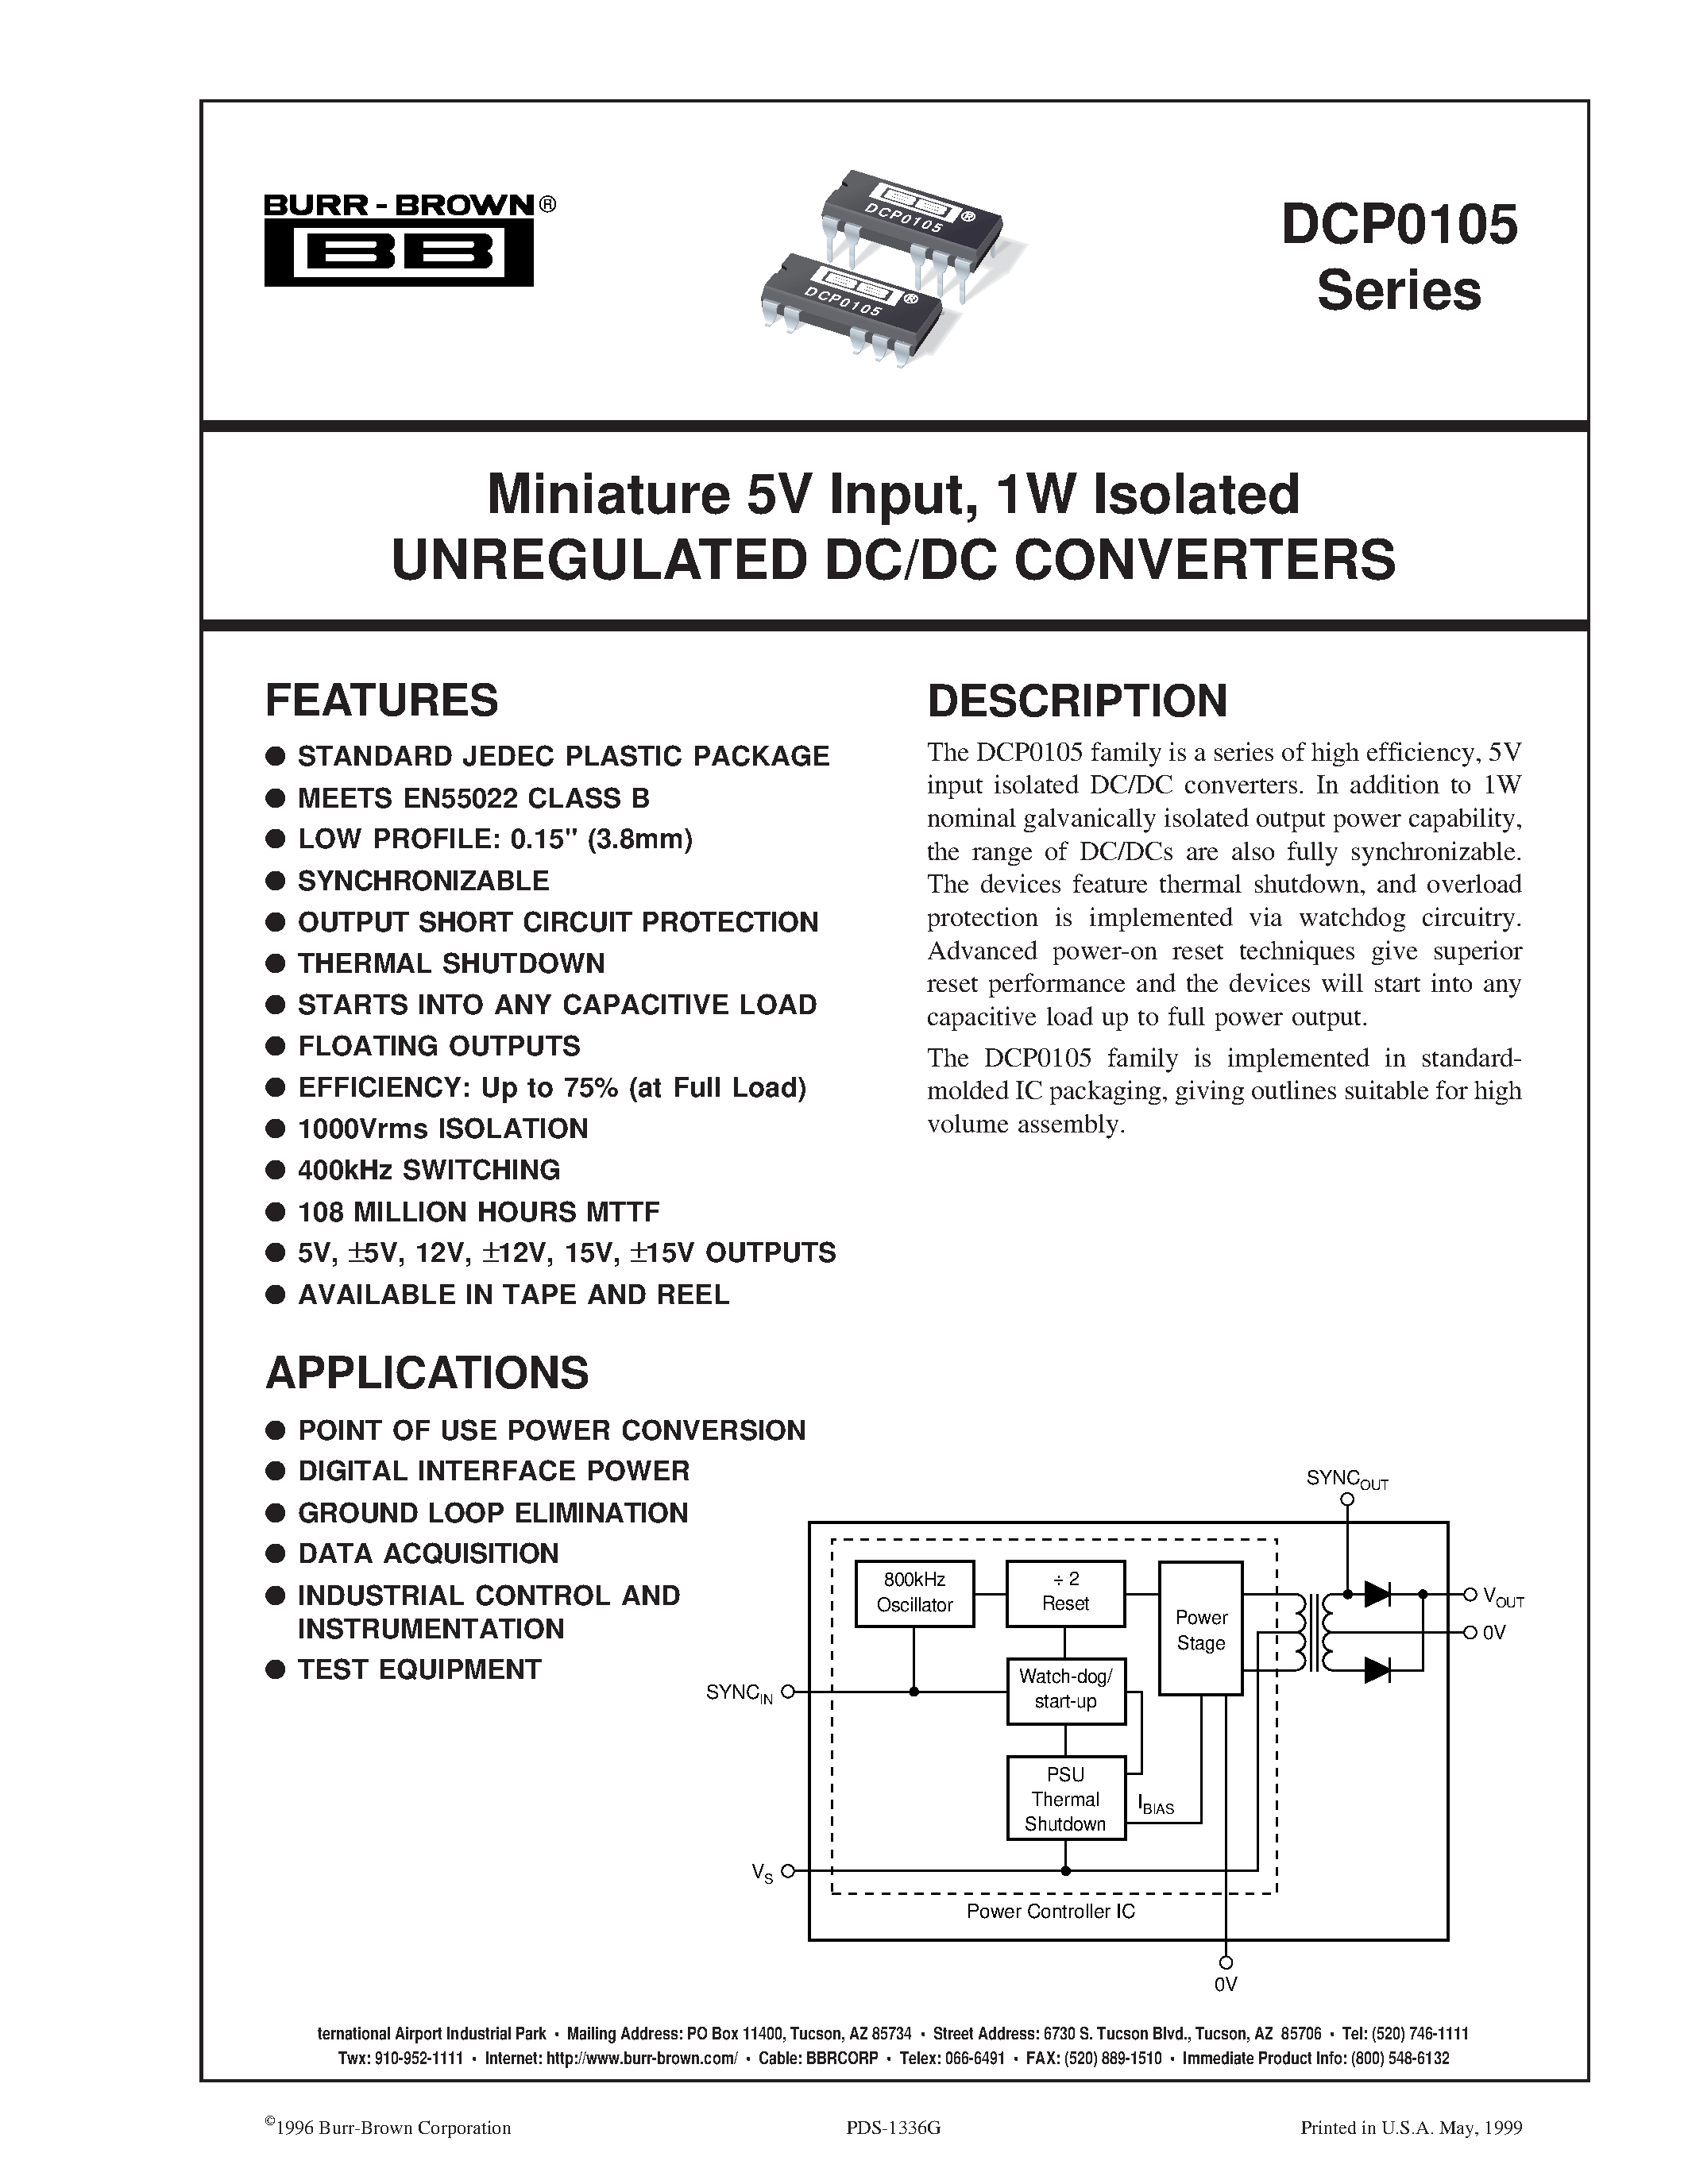 Datasheet DCP010515DP-U - Miniature 5V Input/ 1W Isolated UNREGULATED DC/DC CONVERTERS page 1